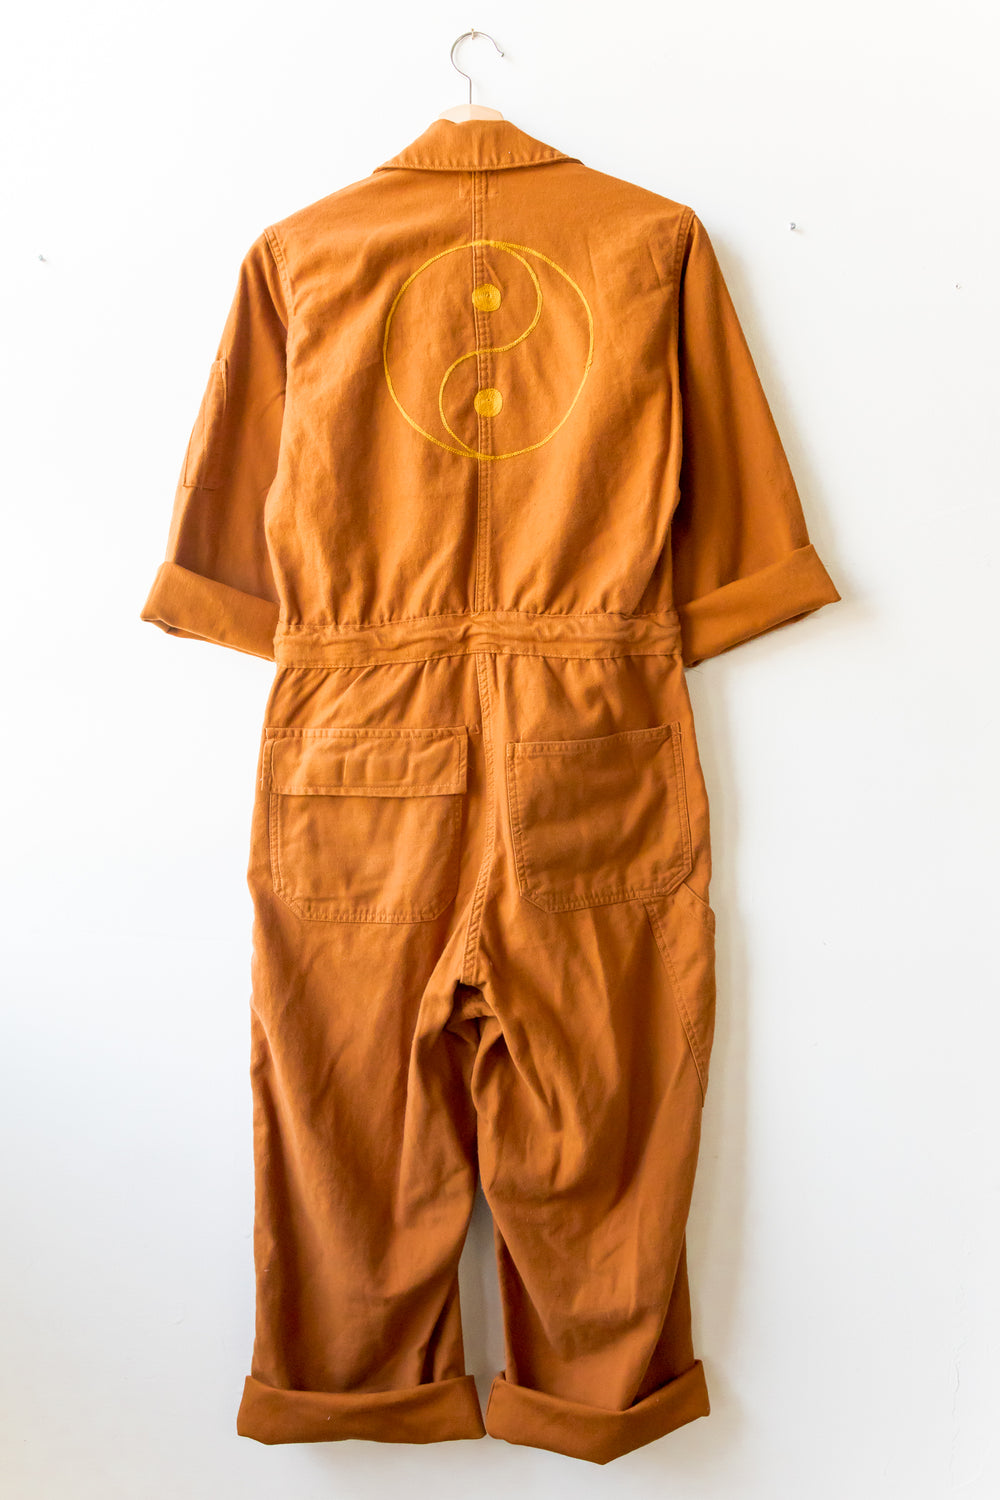 X Prism Spice Brown Yin Yang Coveralls